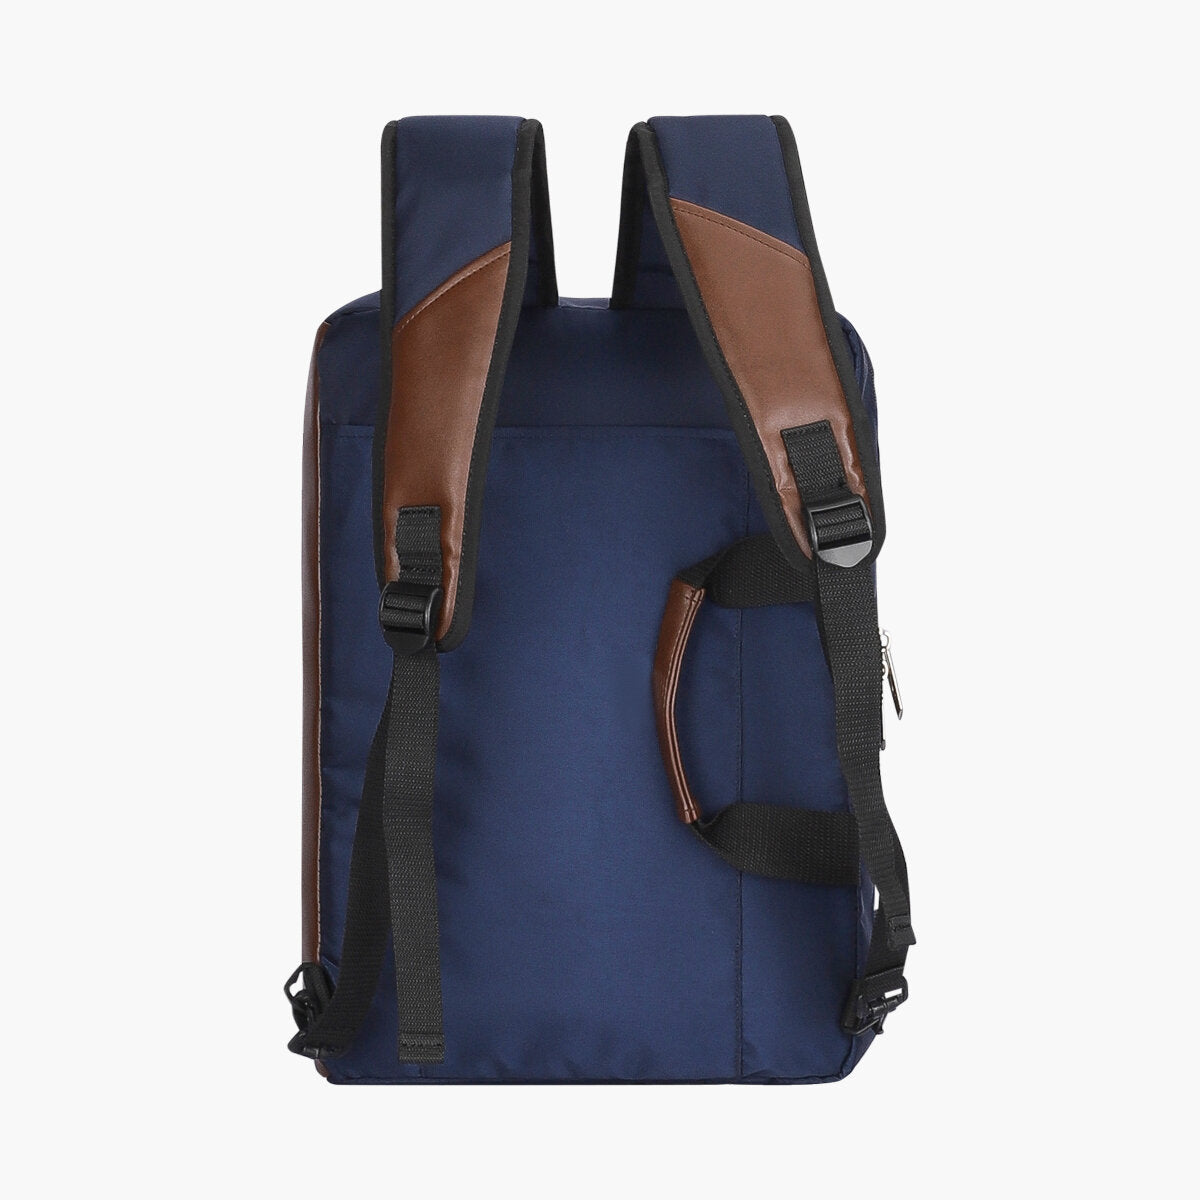 Navy | Protecta The Underdog Convertible Briefcase Backpack - 6